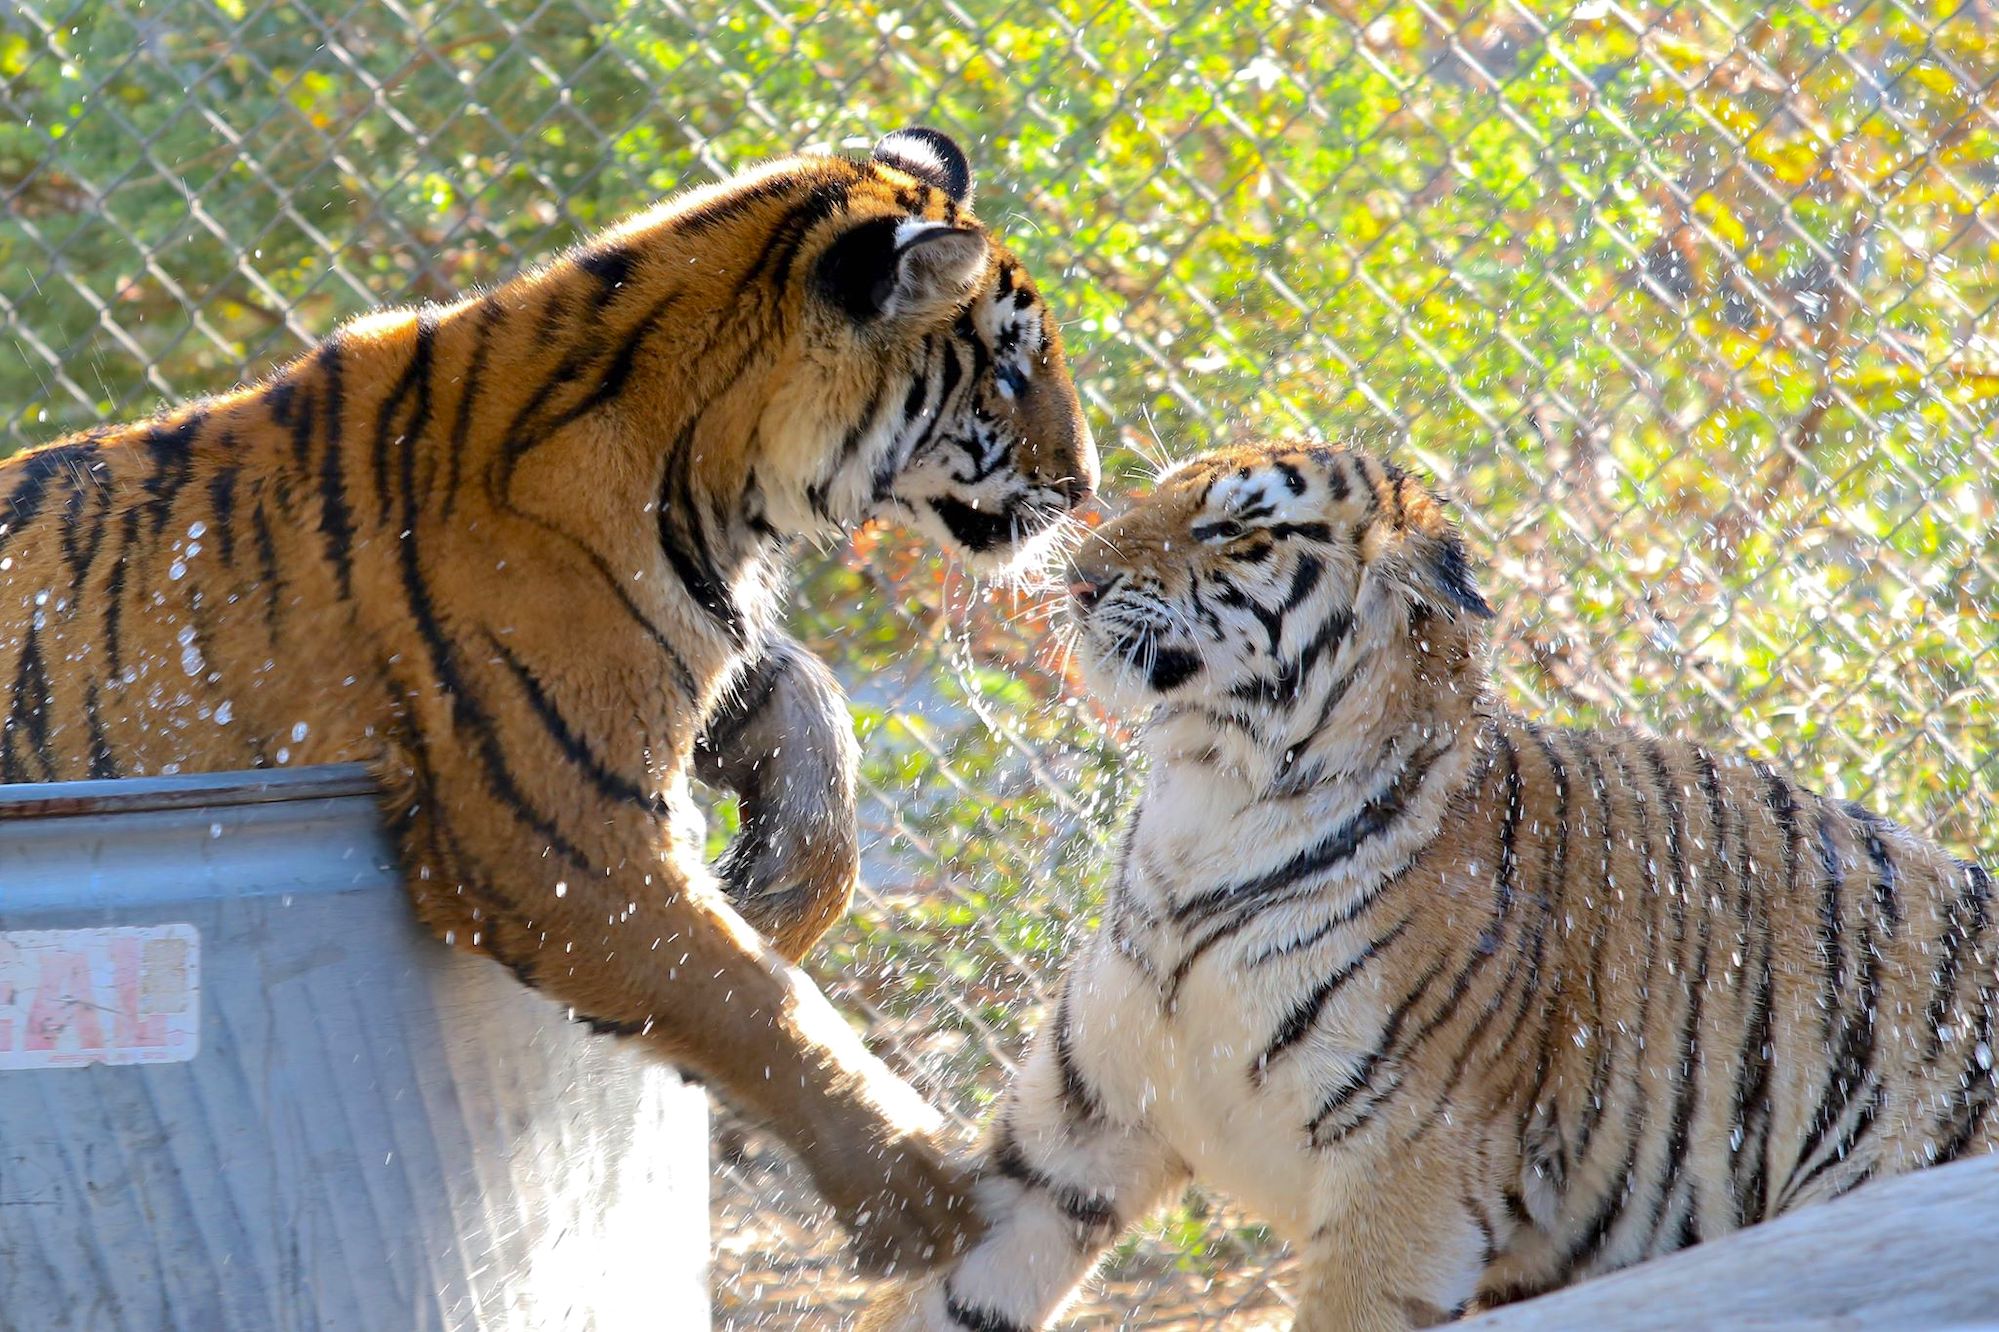 Two tigers facing each other